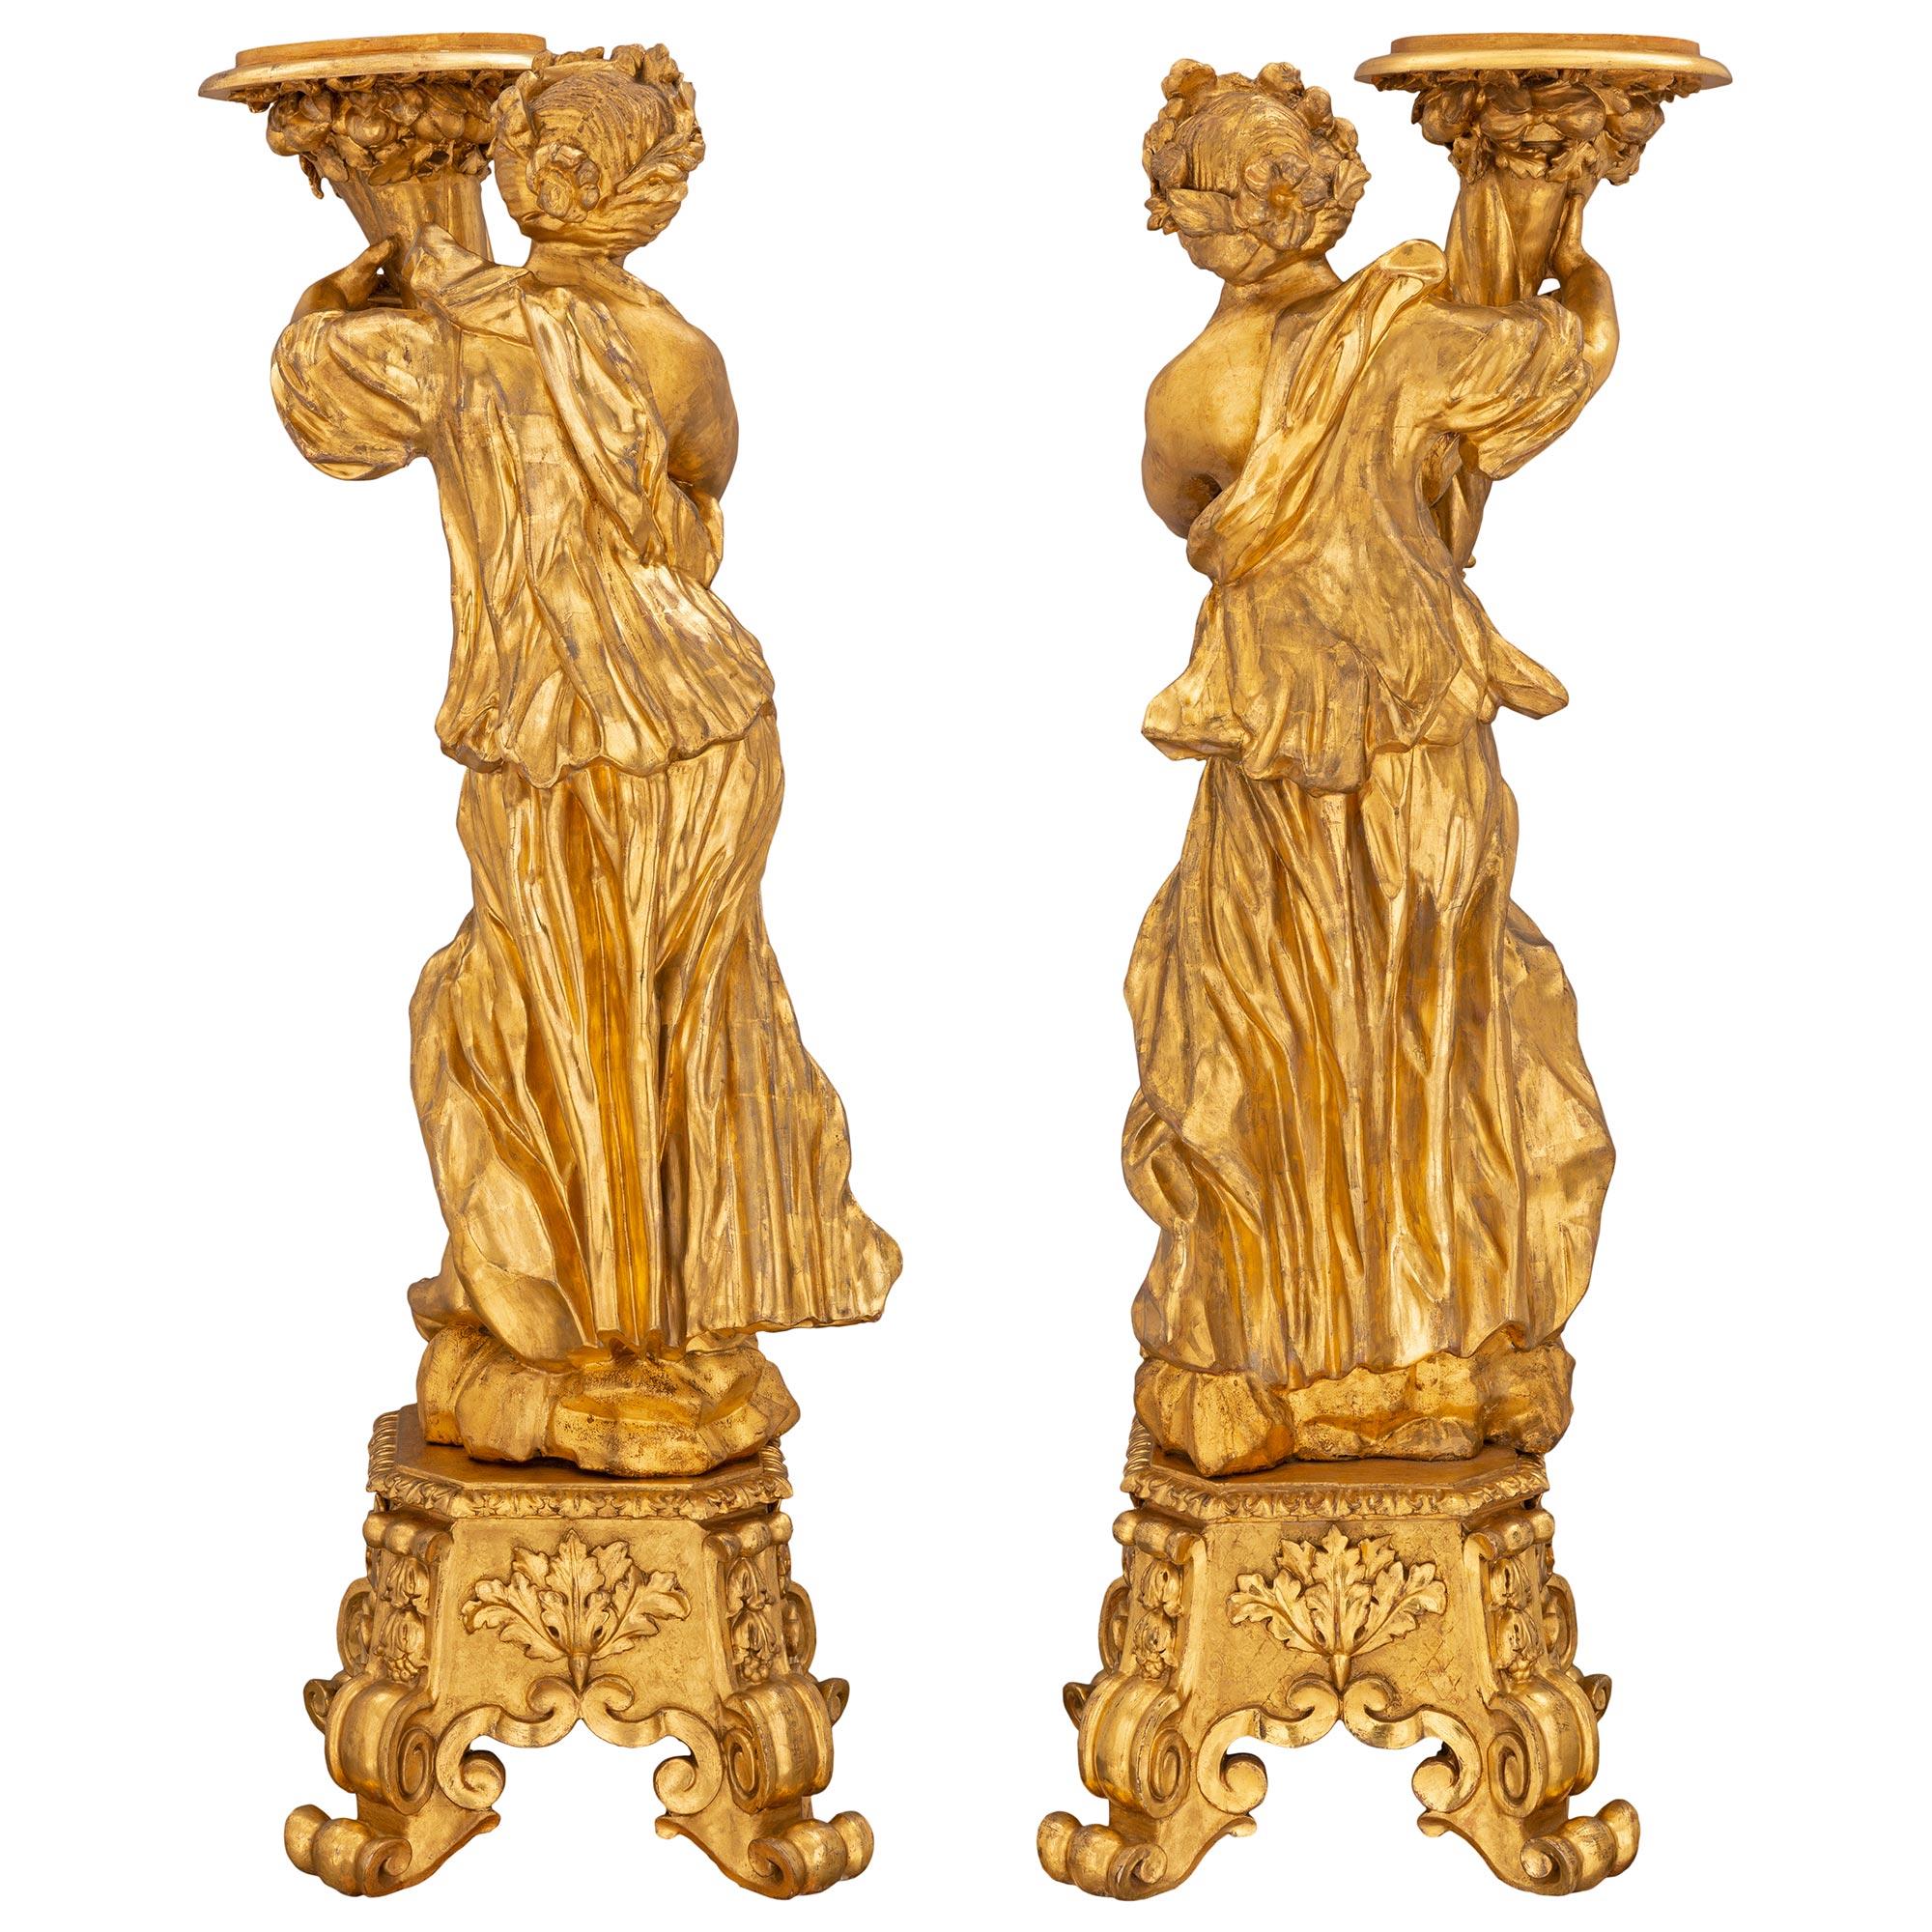 Pair of Italian Late 17th Century Baroque Period Giltwood Torchières For Sale 1